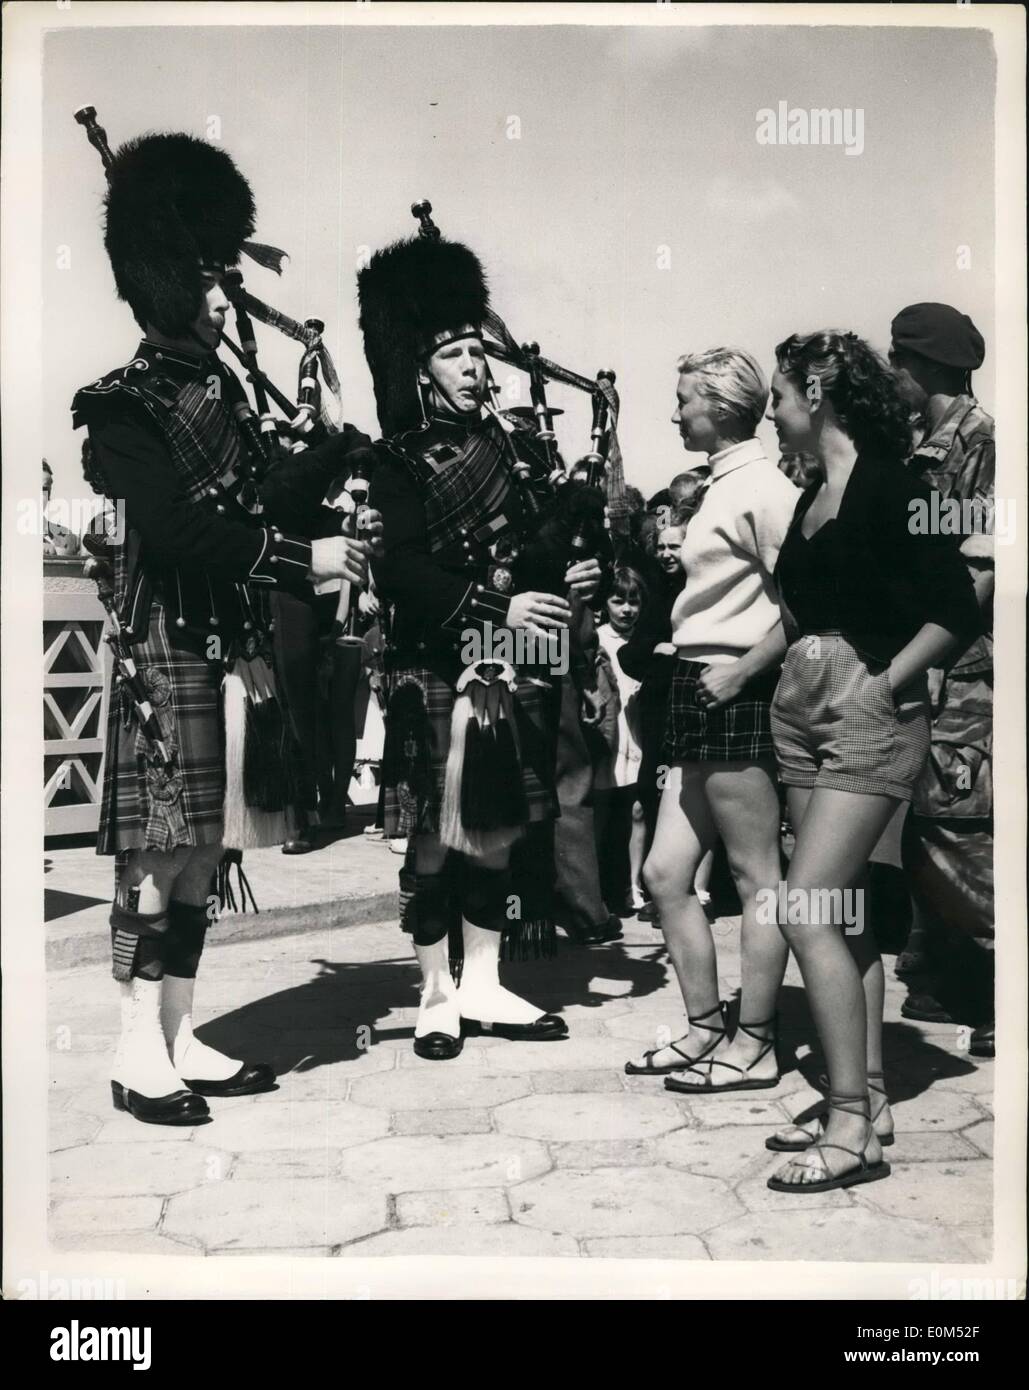 Aug. 08, 1953 - Scots Guards Entertained in Le Tourquet - And Do A Bit Of Entertaining Themselves: The French strikes were forgotten recently, when the townsfolk of Le Touquet spared nothing to entertain a detachment of Scots Guards - the regiment which helped in the liberation of the resort in 1944. Photo shows Kilted Pipers of the Scots Guards were a source of admiration by townsfolk of Le Touquet. Stock Photo